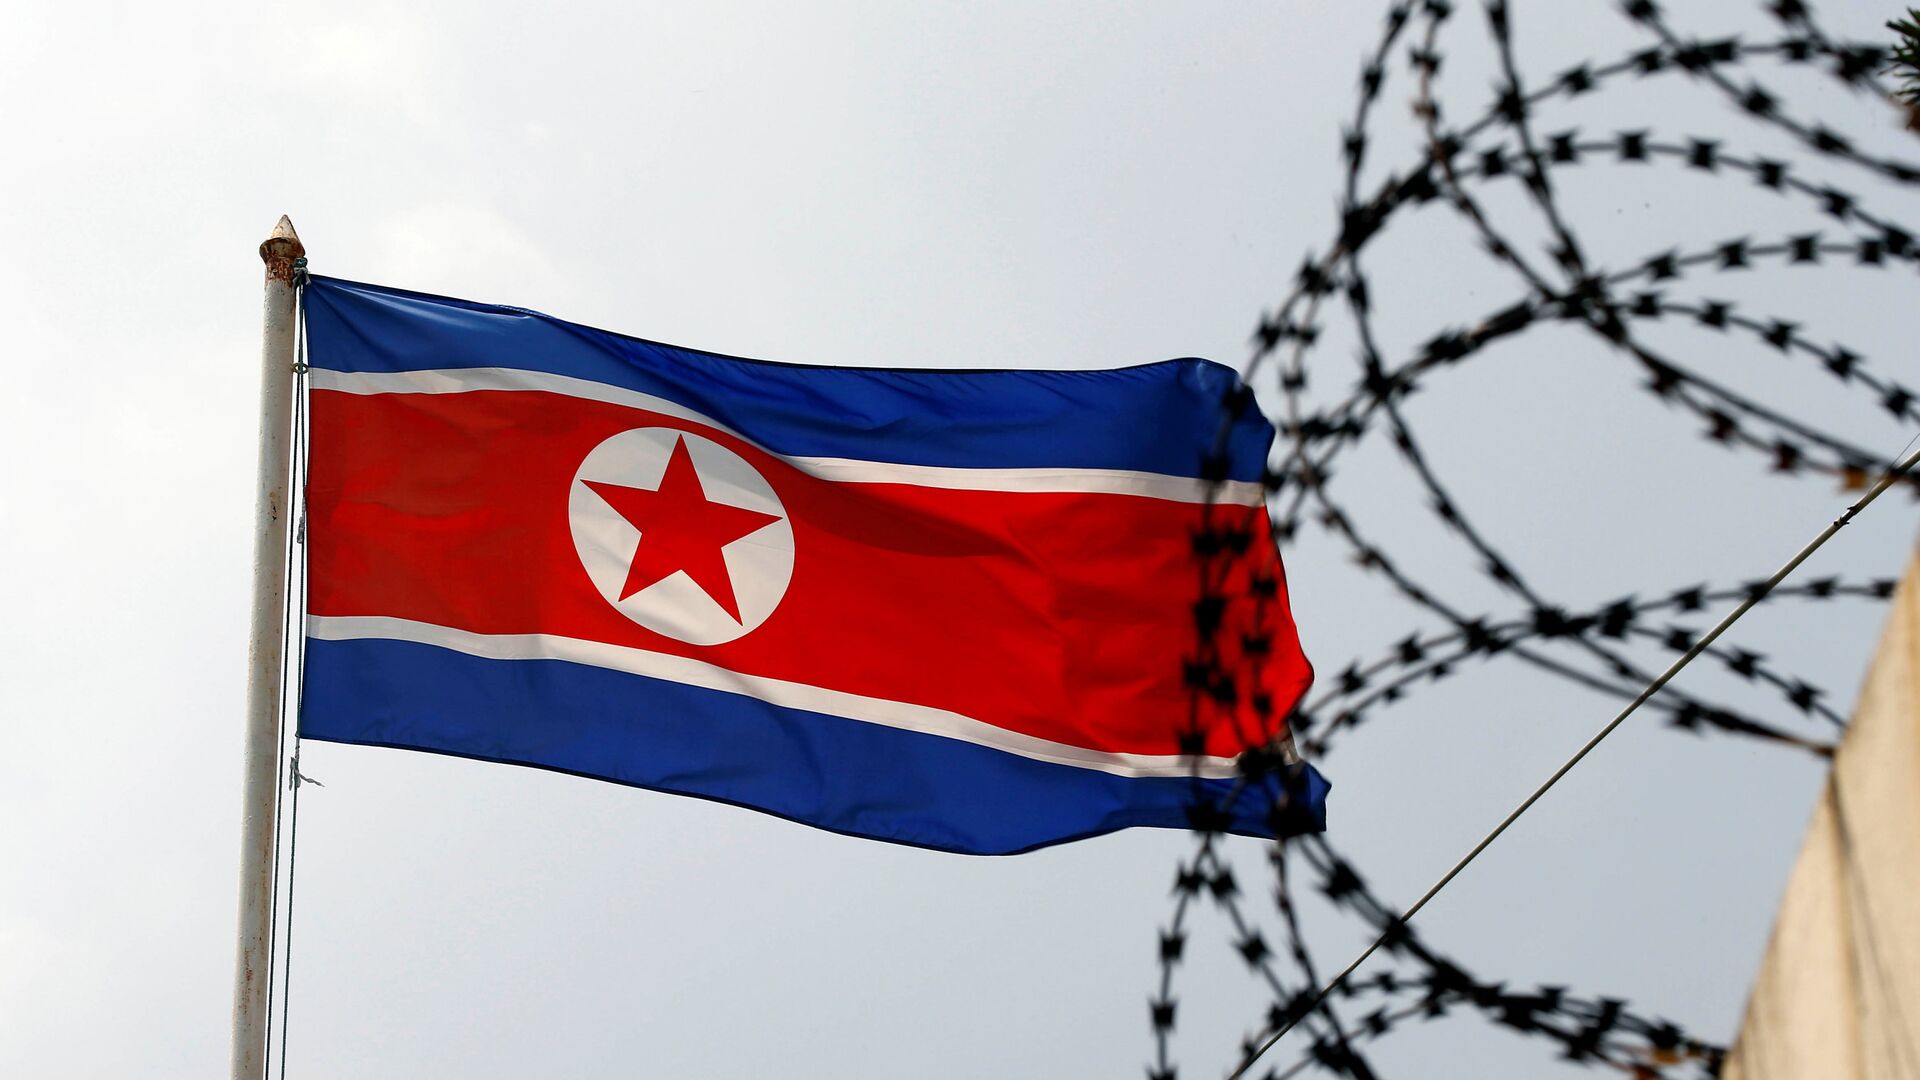 The North Korea flag flutters next to concertina wire at the North Korean embassy in Kuala Lumpur, Malaysia March 9, 2017 - Sputnik Mundo, 1920, 11.08.2021